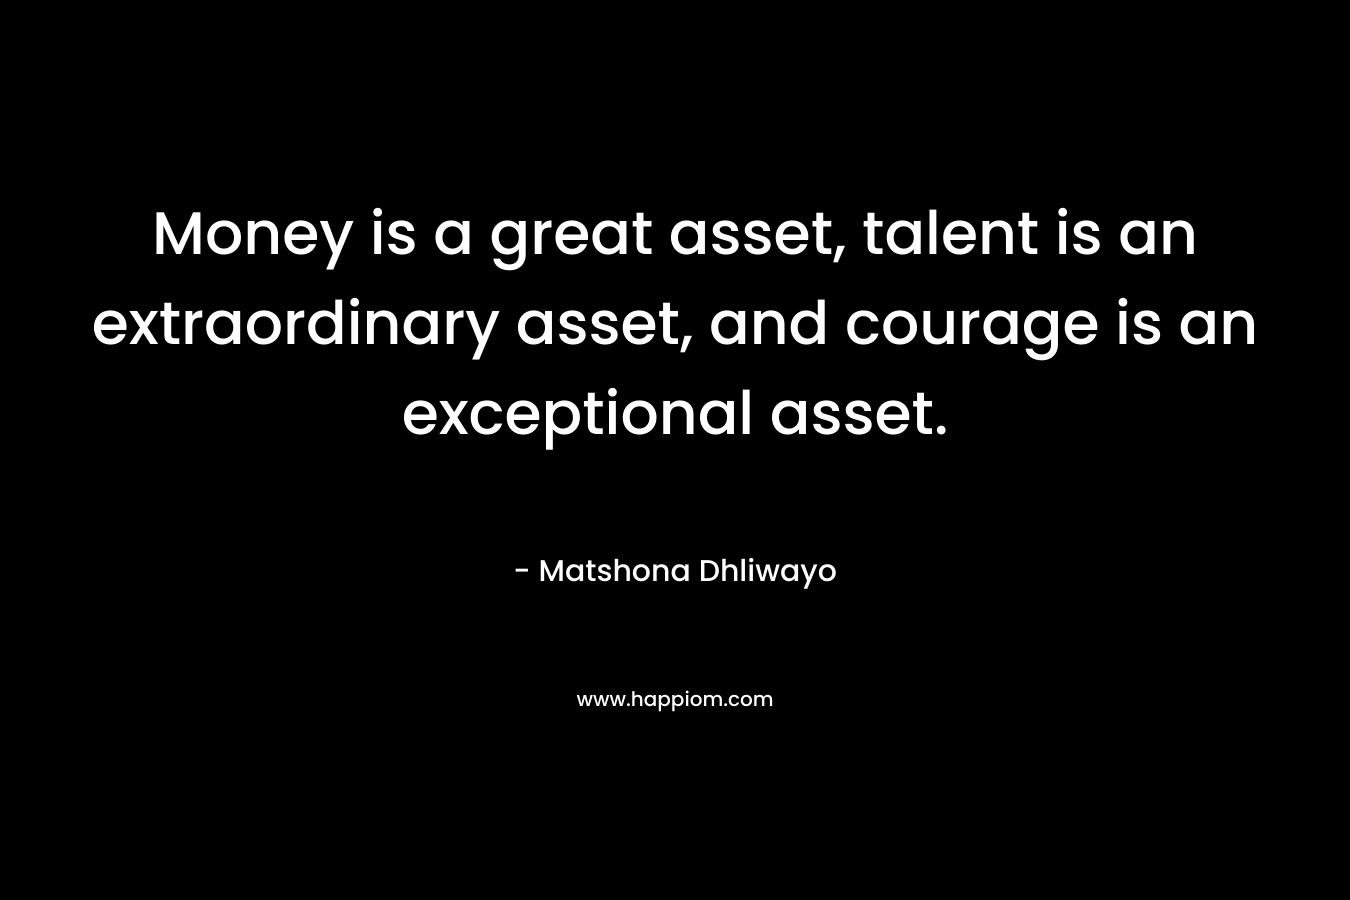 Money is a great asset, talent is an extraordinary asset, and courage is an exceptional asset. – Matshona Dhliwayo